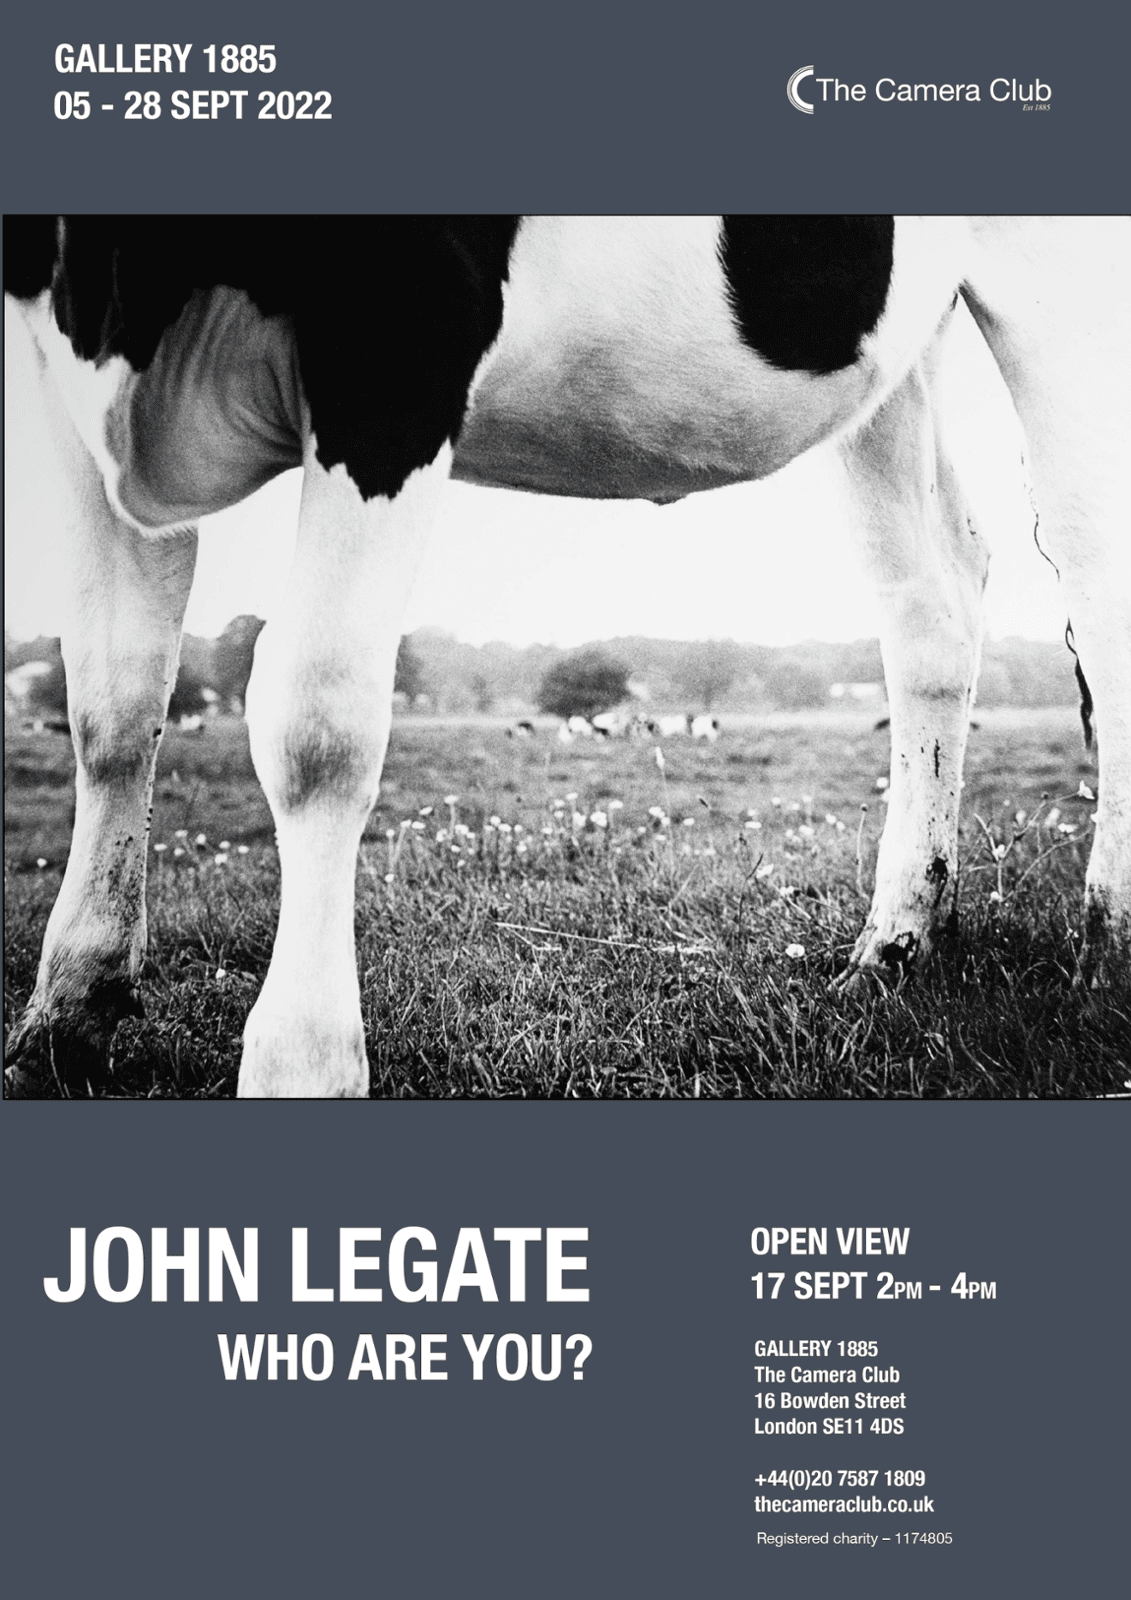 Gallery 1885: John Legate - Who Are You?